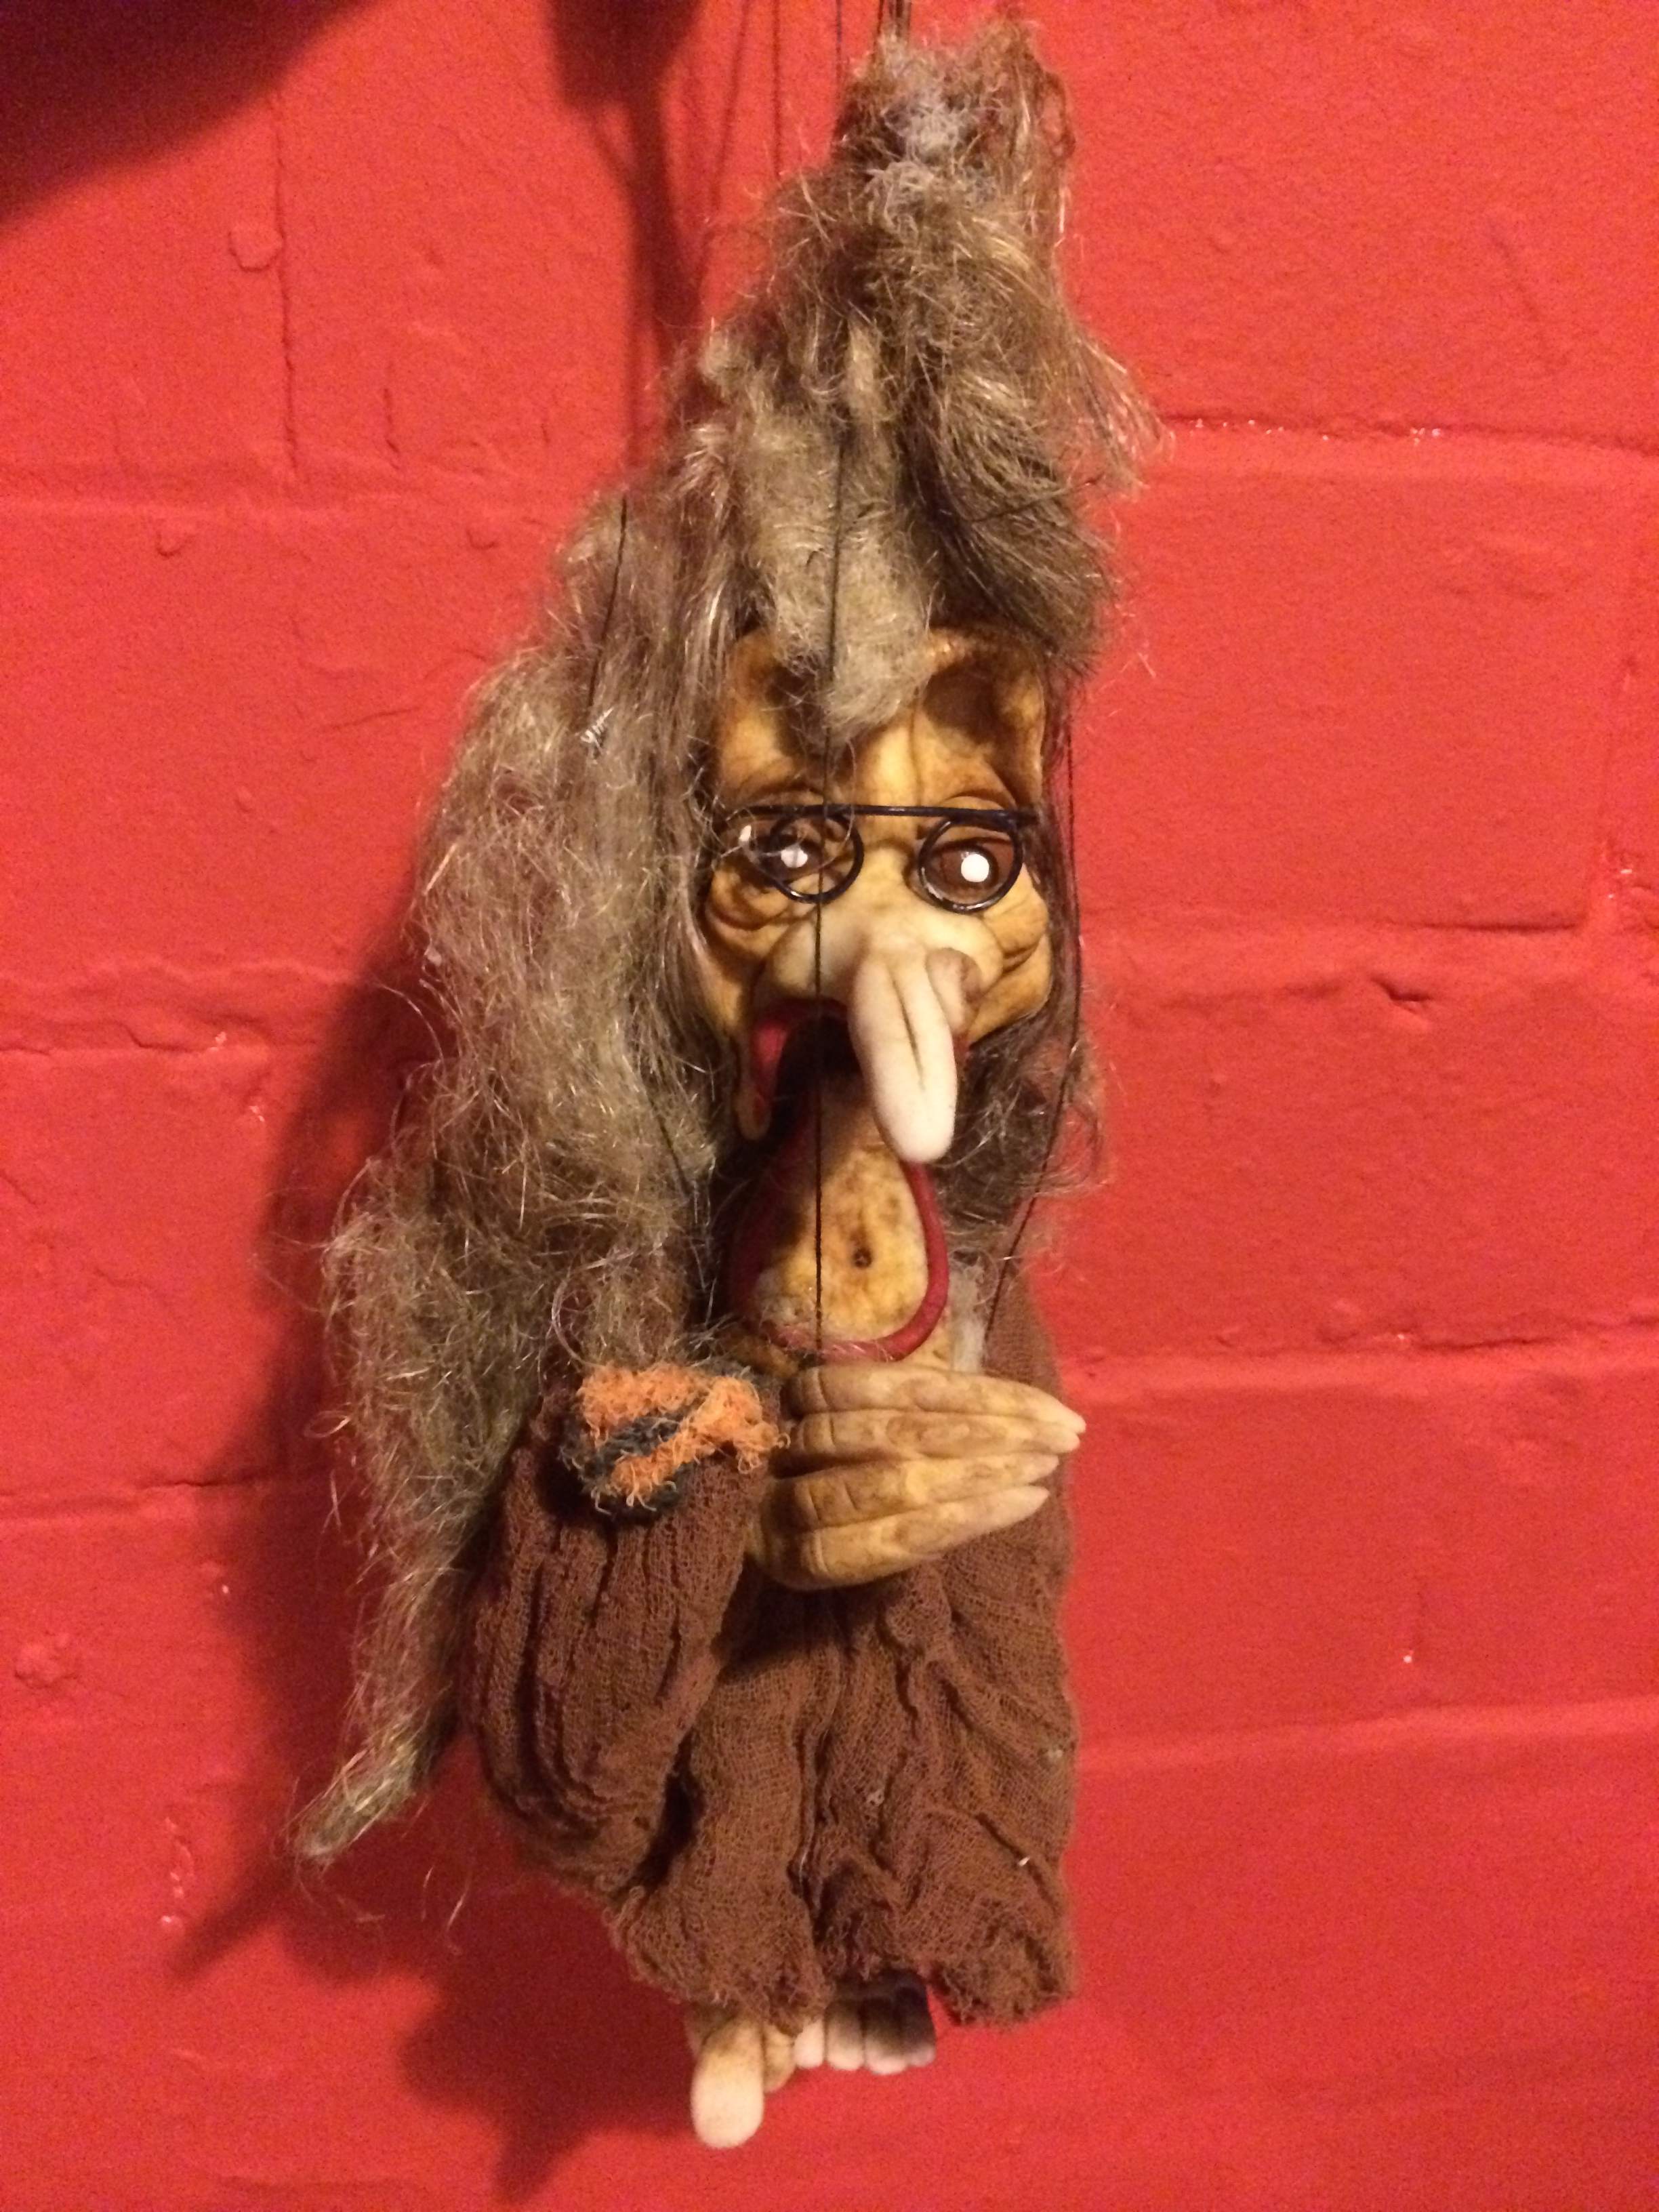 Hag crone witch puppet, previously used as a prop.